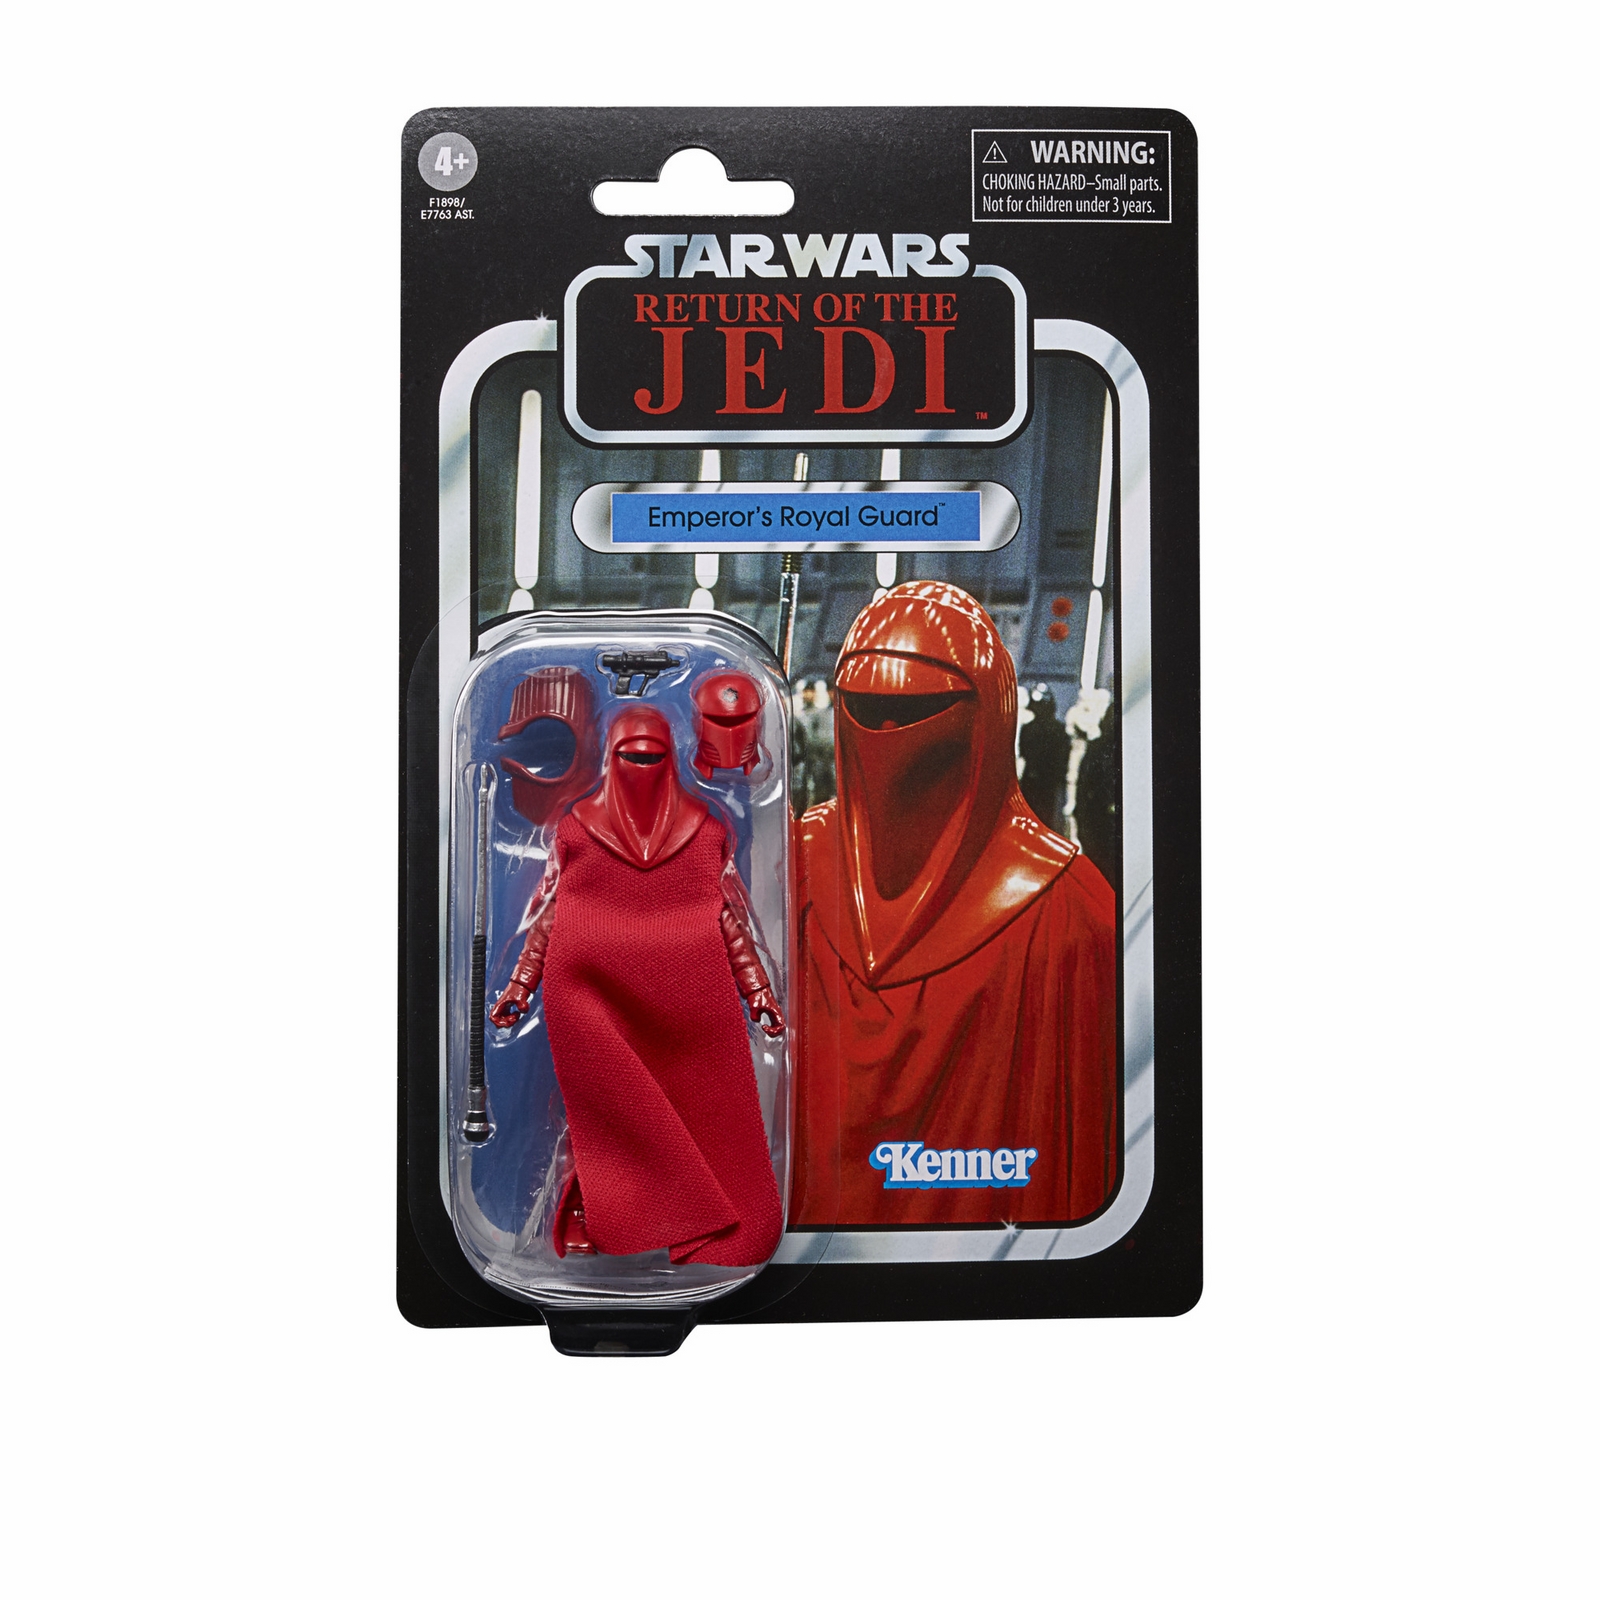 STAR WARS THE VINTAGE COLLECTION 3.75-INCH EMPORER’S ROYAL GUARD Figure - in pck (2).jpg